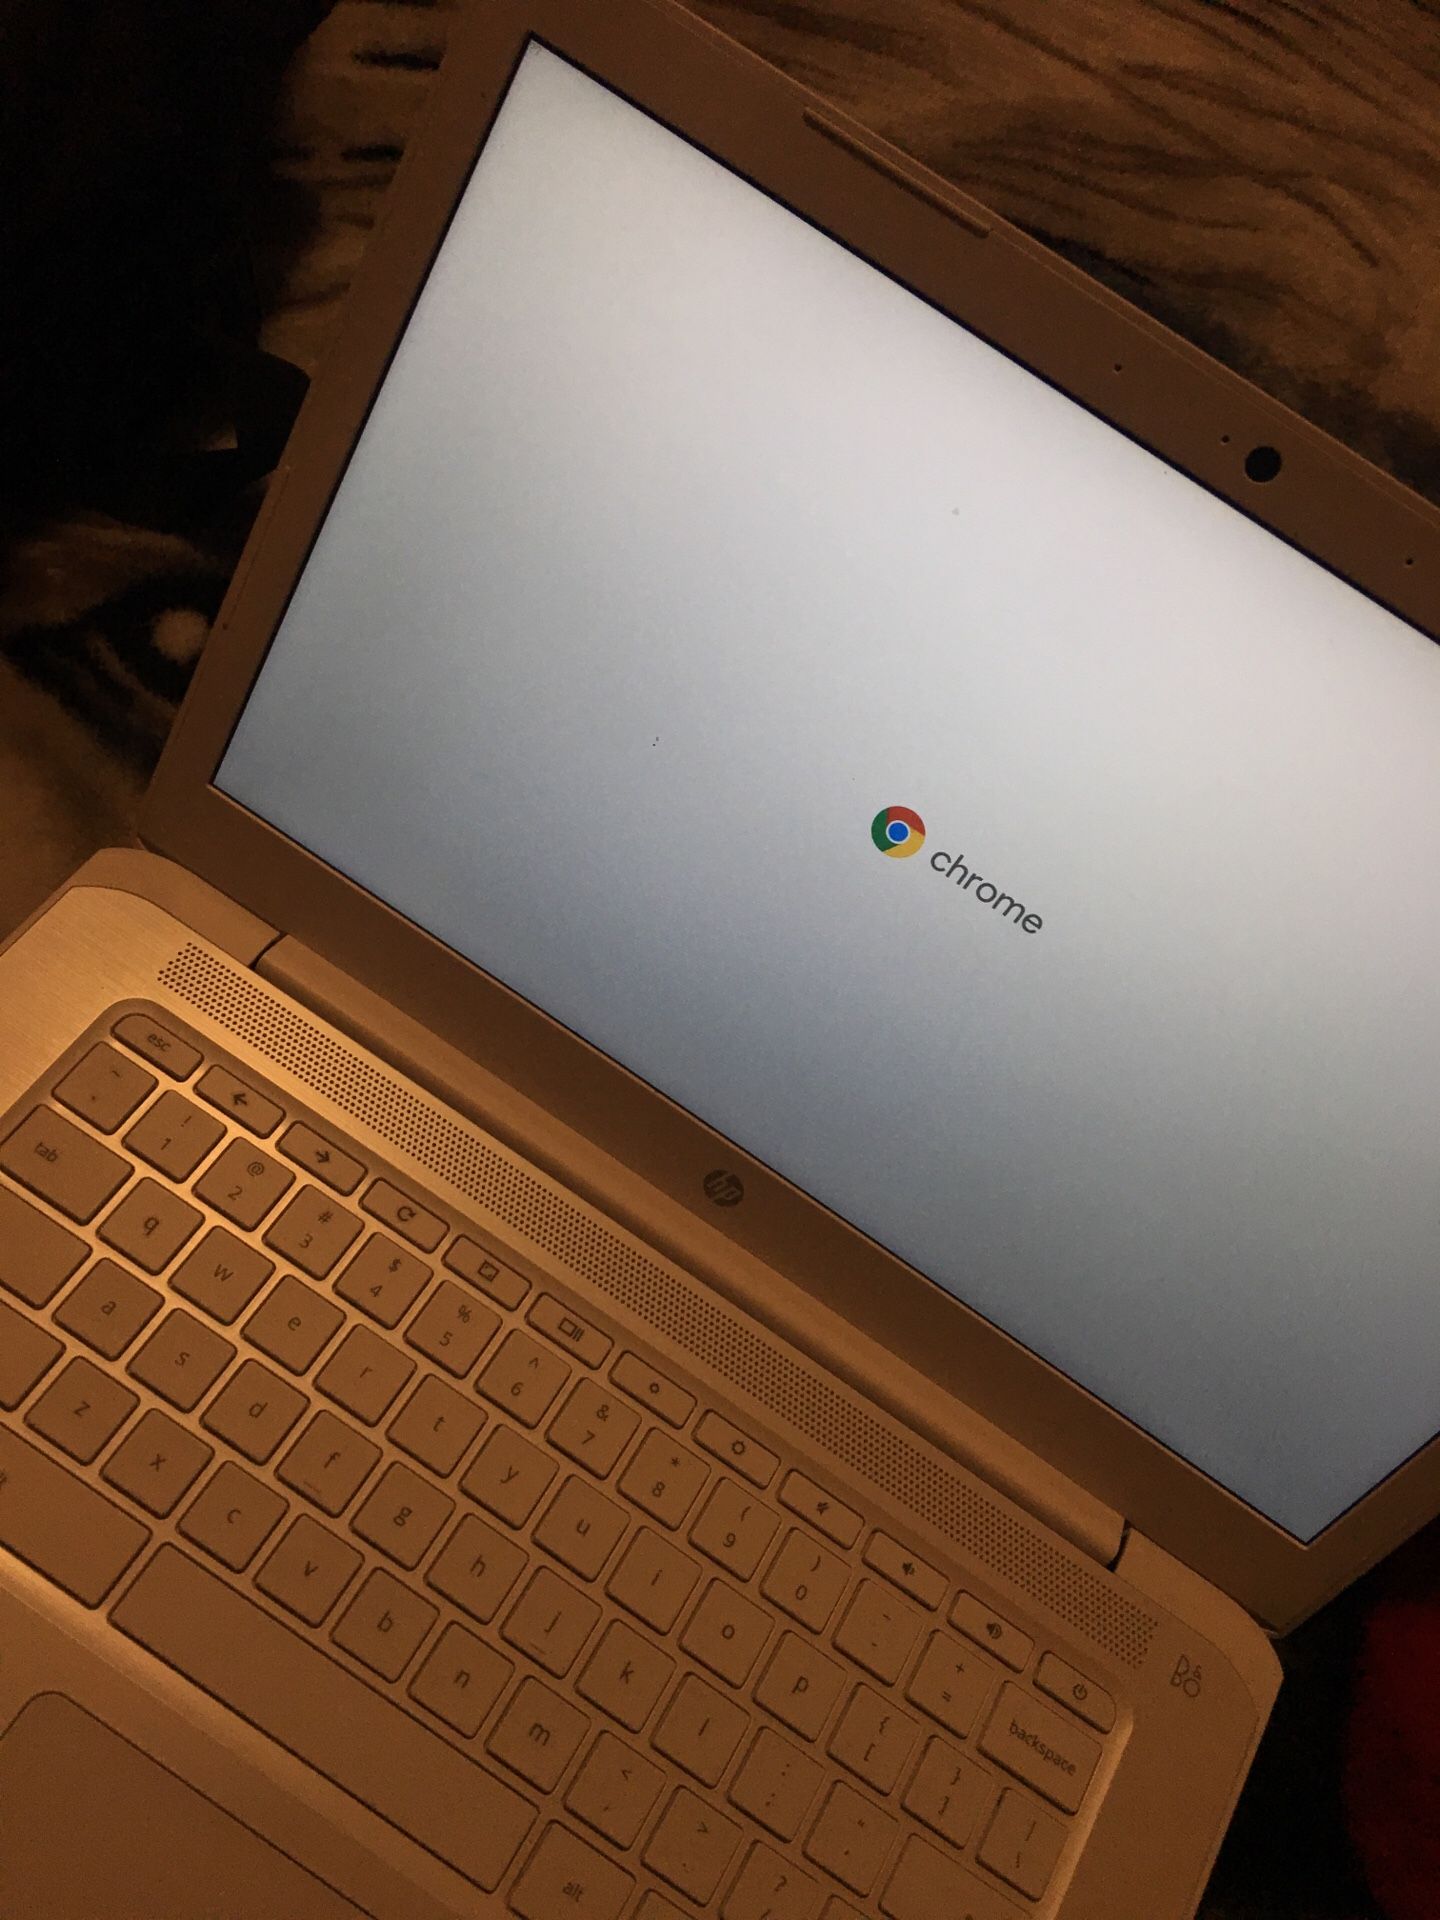 Hp laptop all white $180